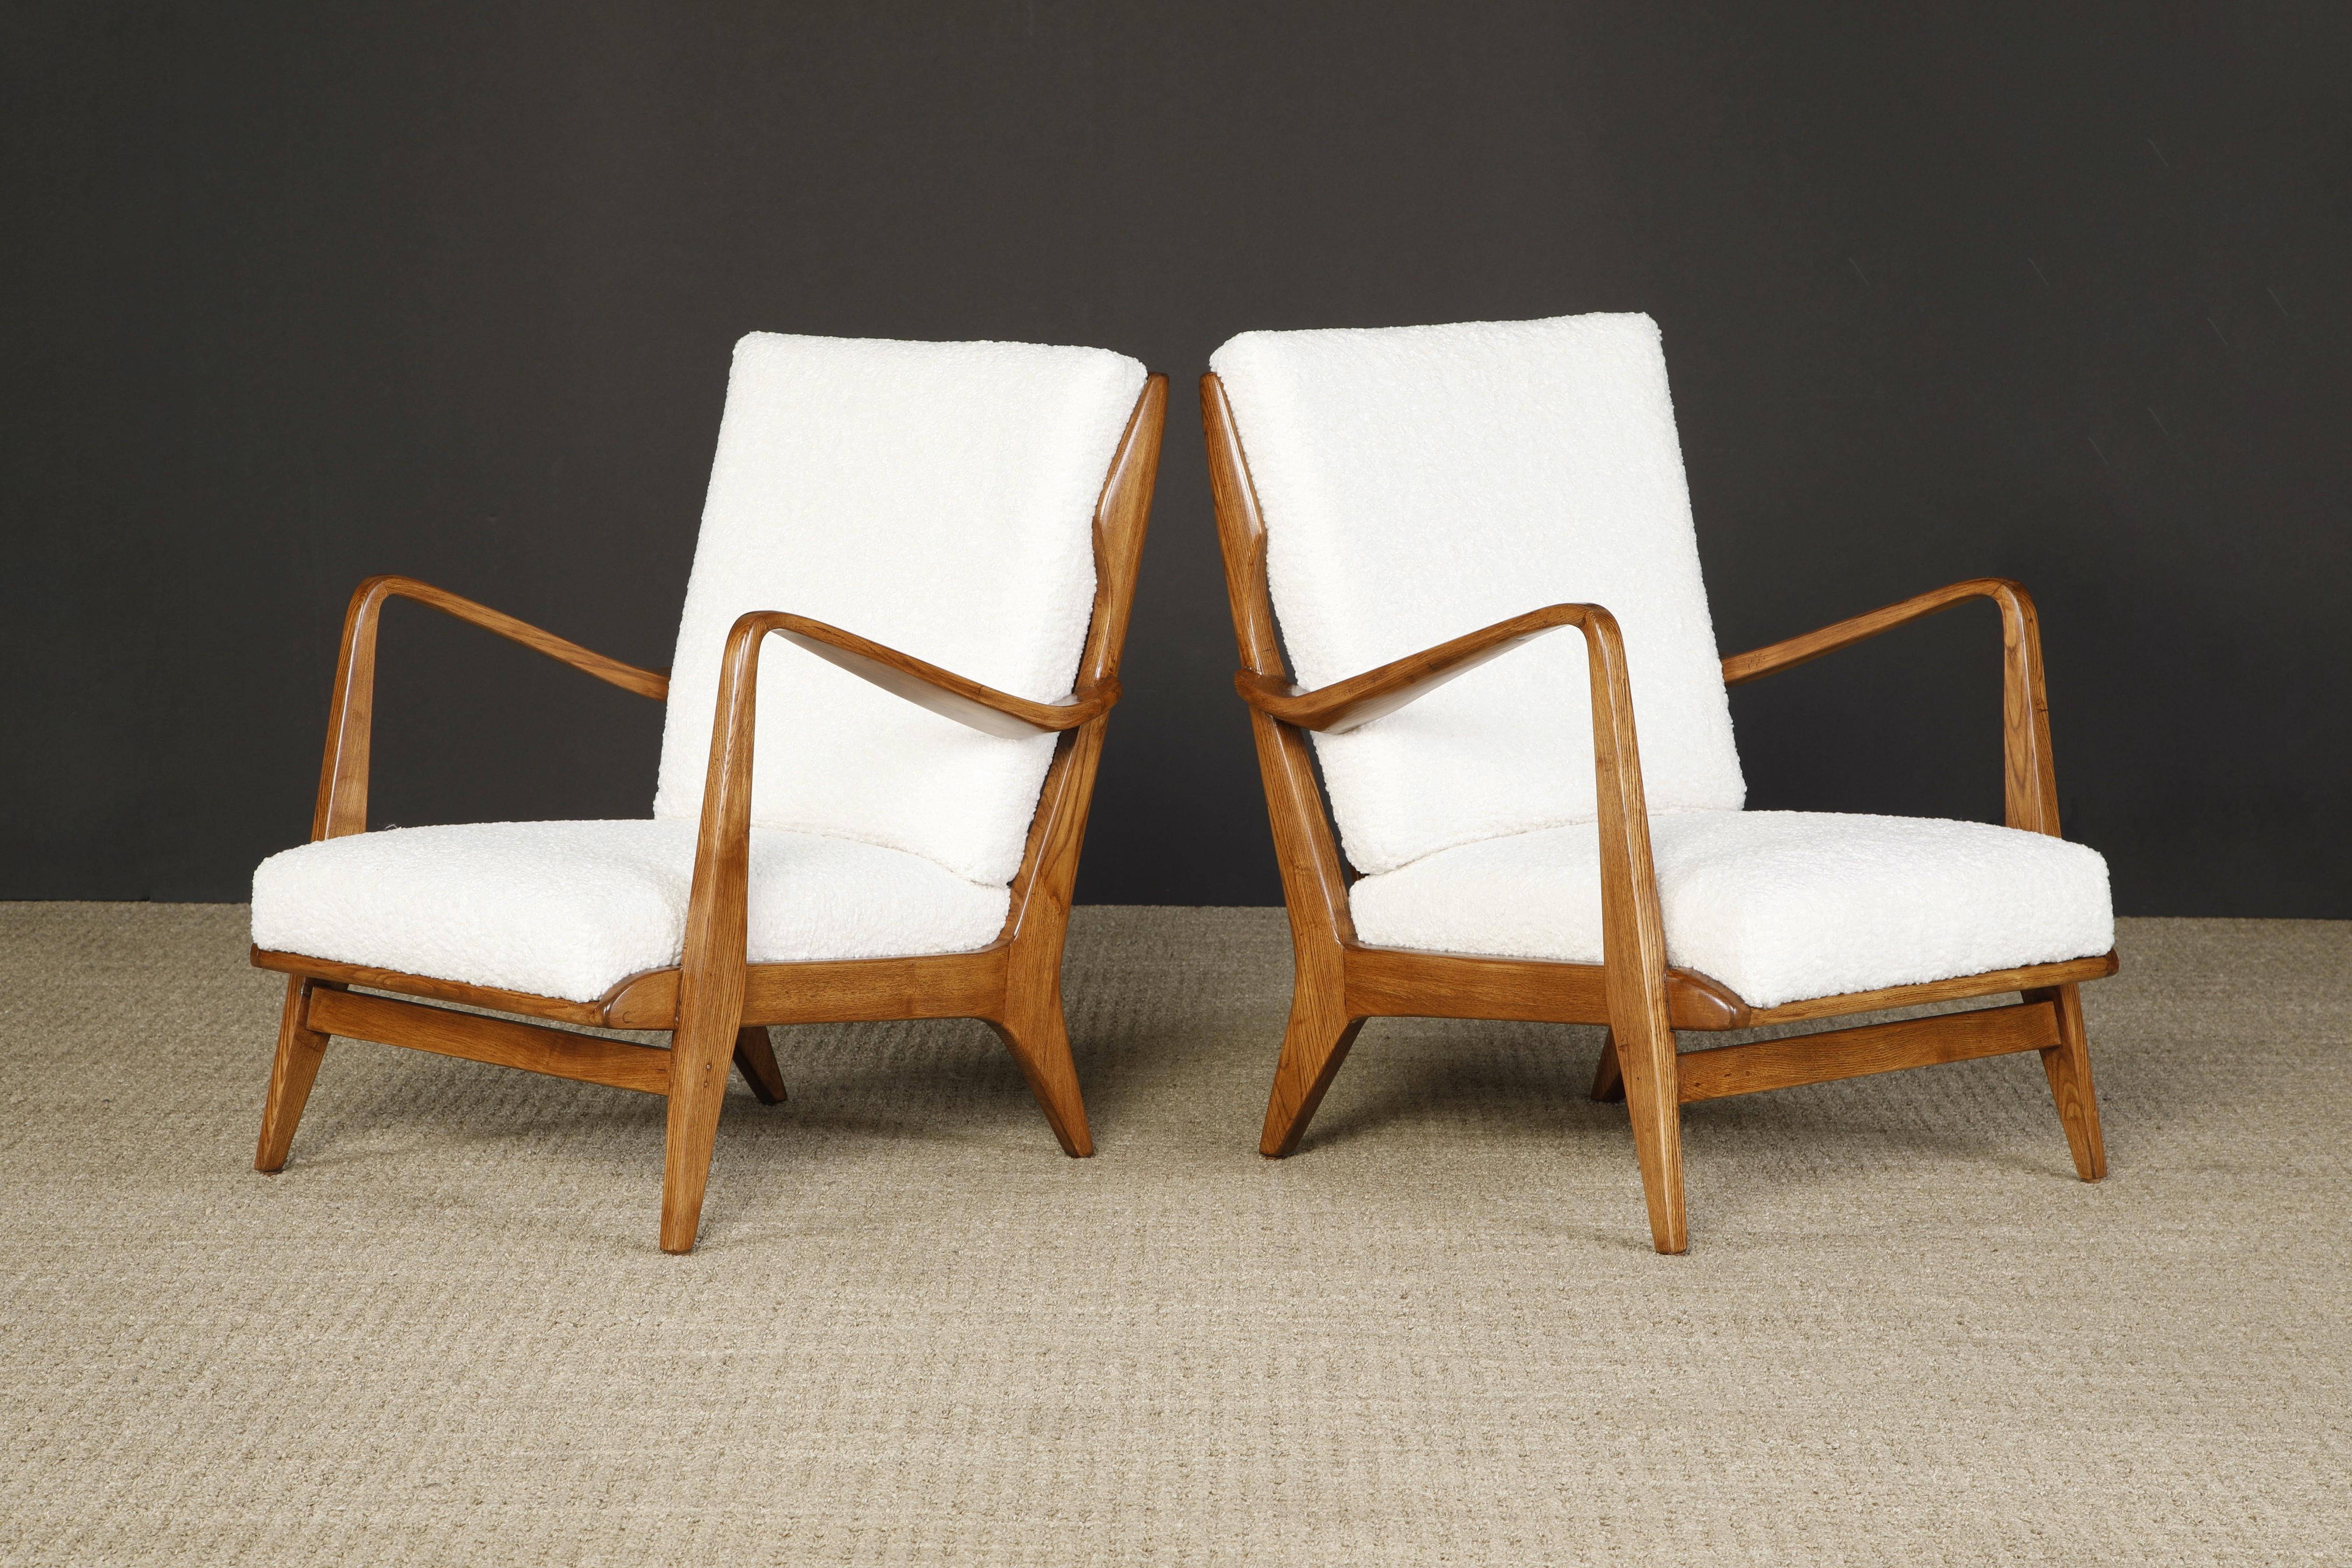 A rare pair of lounge armchairs by Gio Ponti for Cassina, circa 1950s, with reupholstered white bouclé fabric cushions, refinished elm frames with incredible wood grain, signature slatted backs and sculptured arms. 

Such an important design